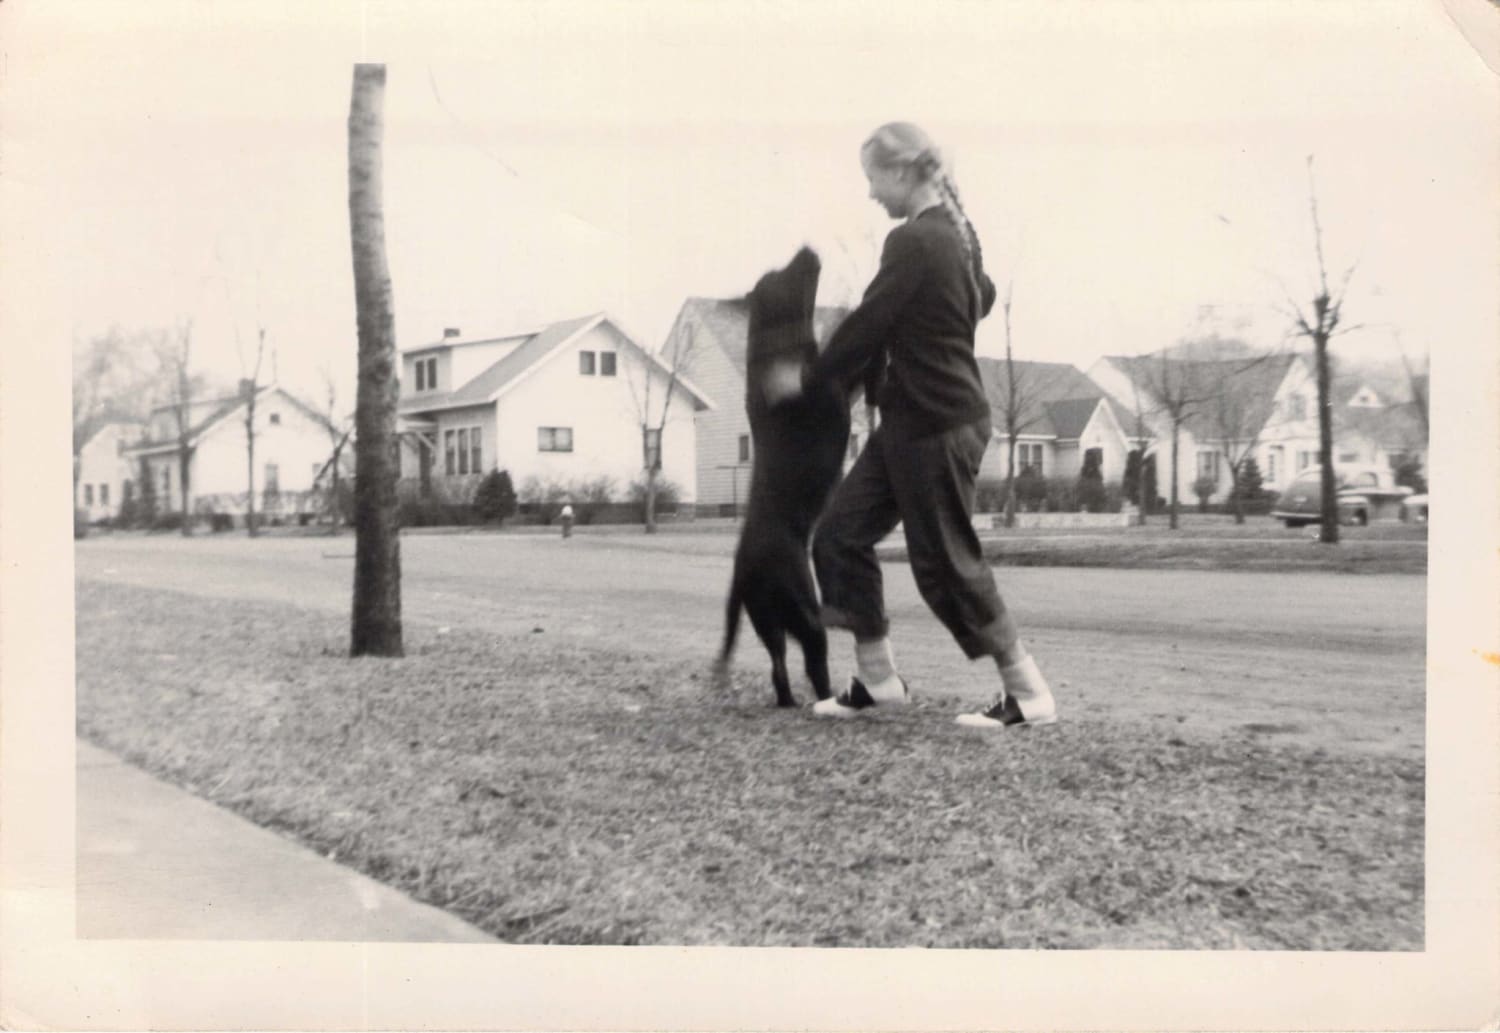 Girl dances with her dog - undated snapshot, 1940s